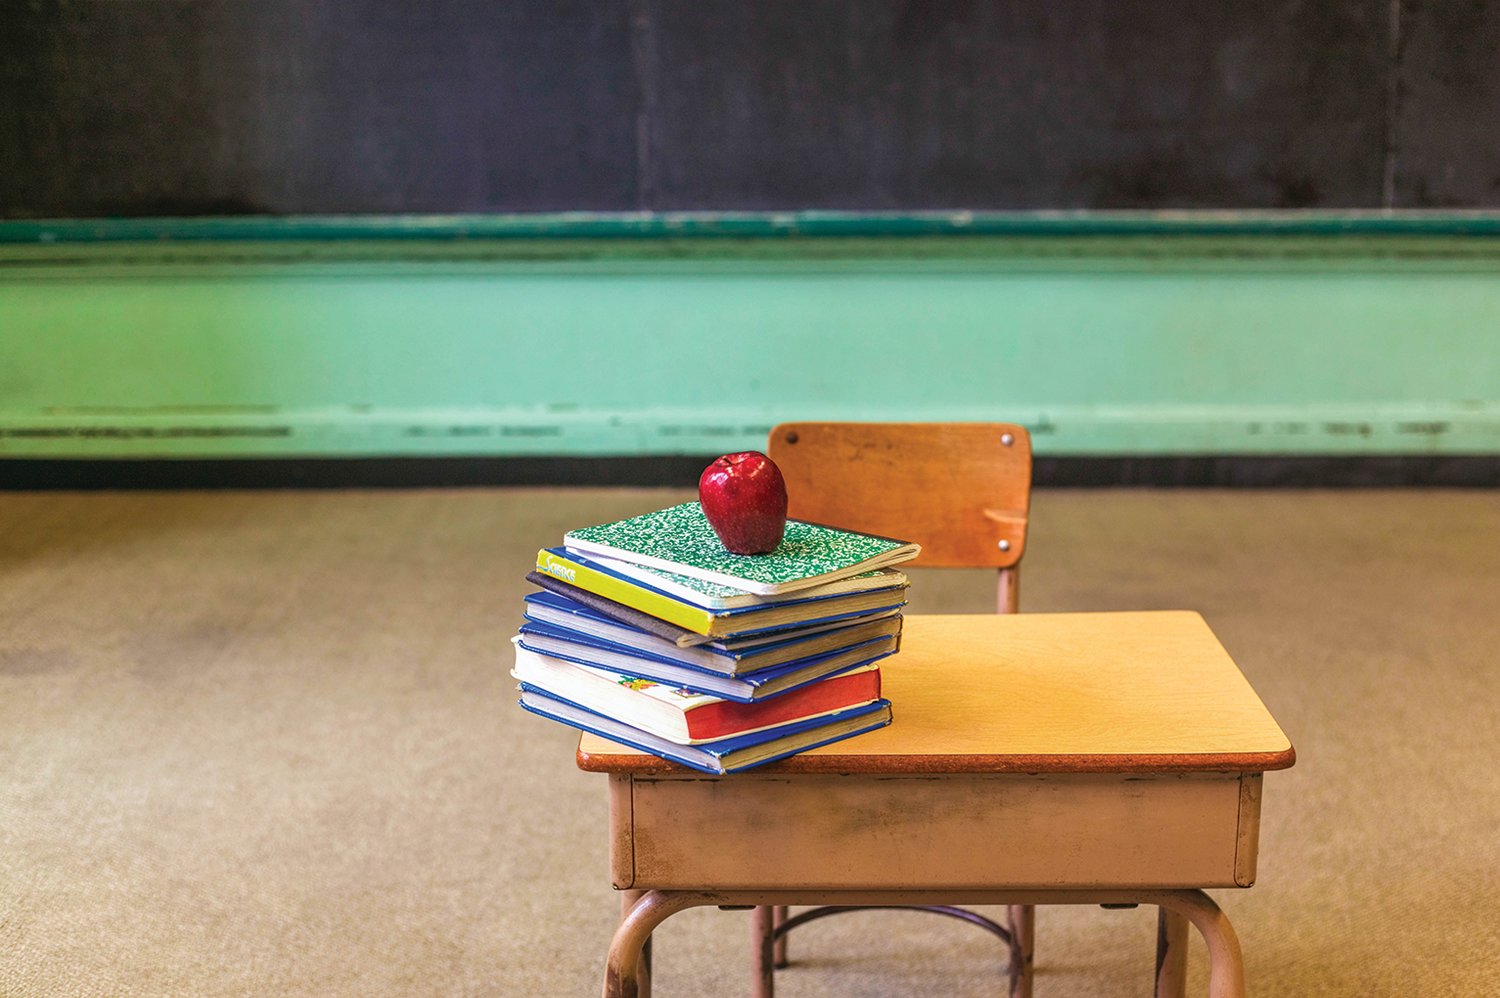 The Frankfort-Schuyler Central School District has announced a new collective bargaining agreement for teachers will remain in effect from July 1, 2022, to June 30, 2026.